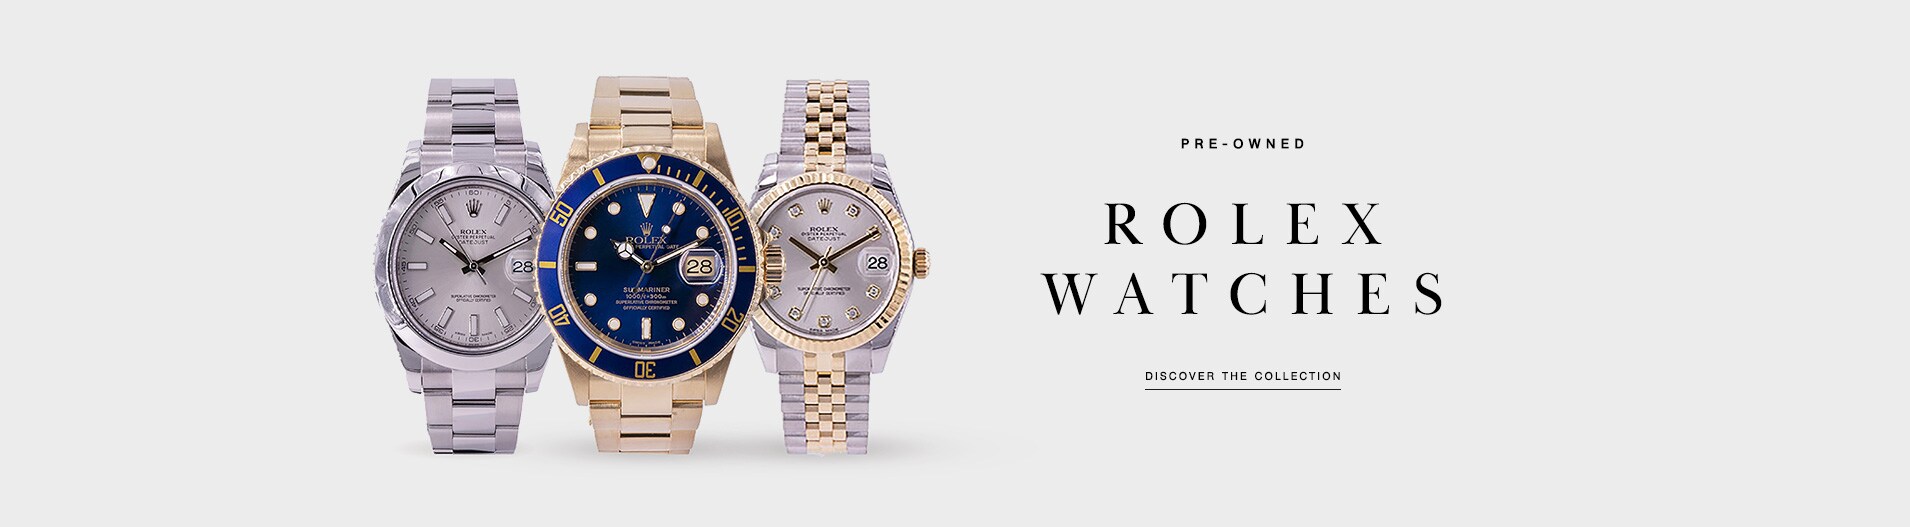 mayors pre owned rolex